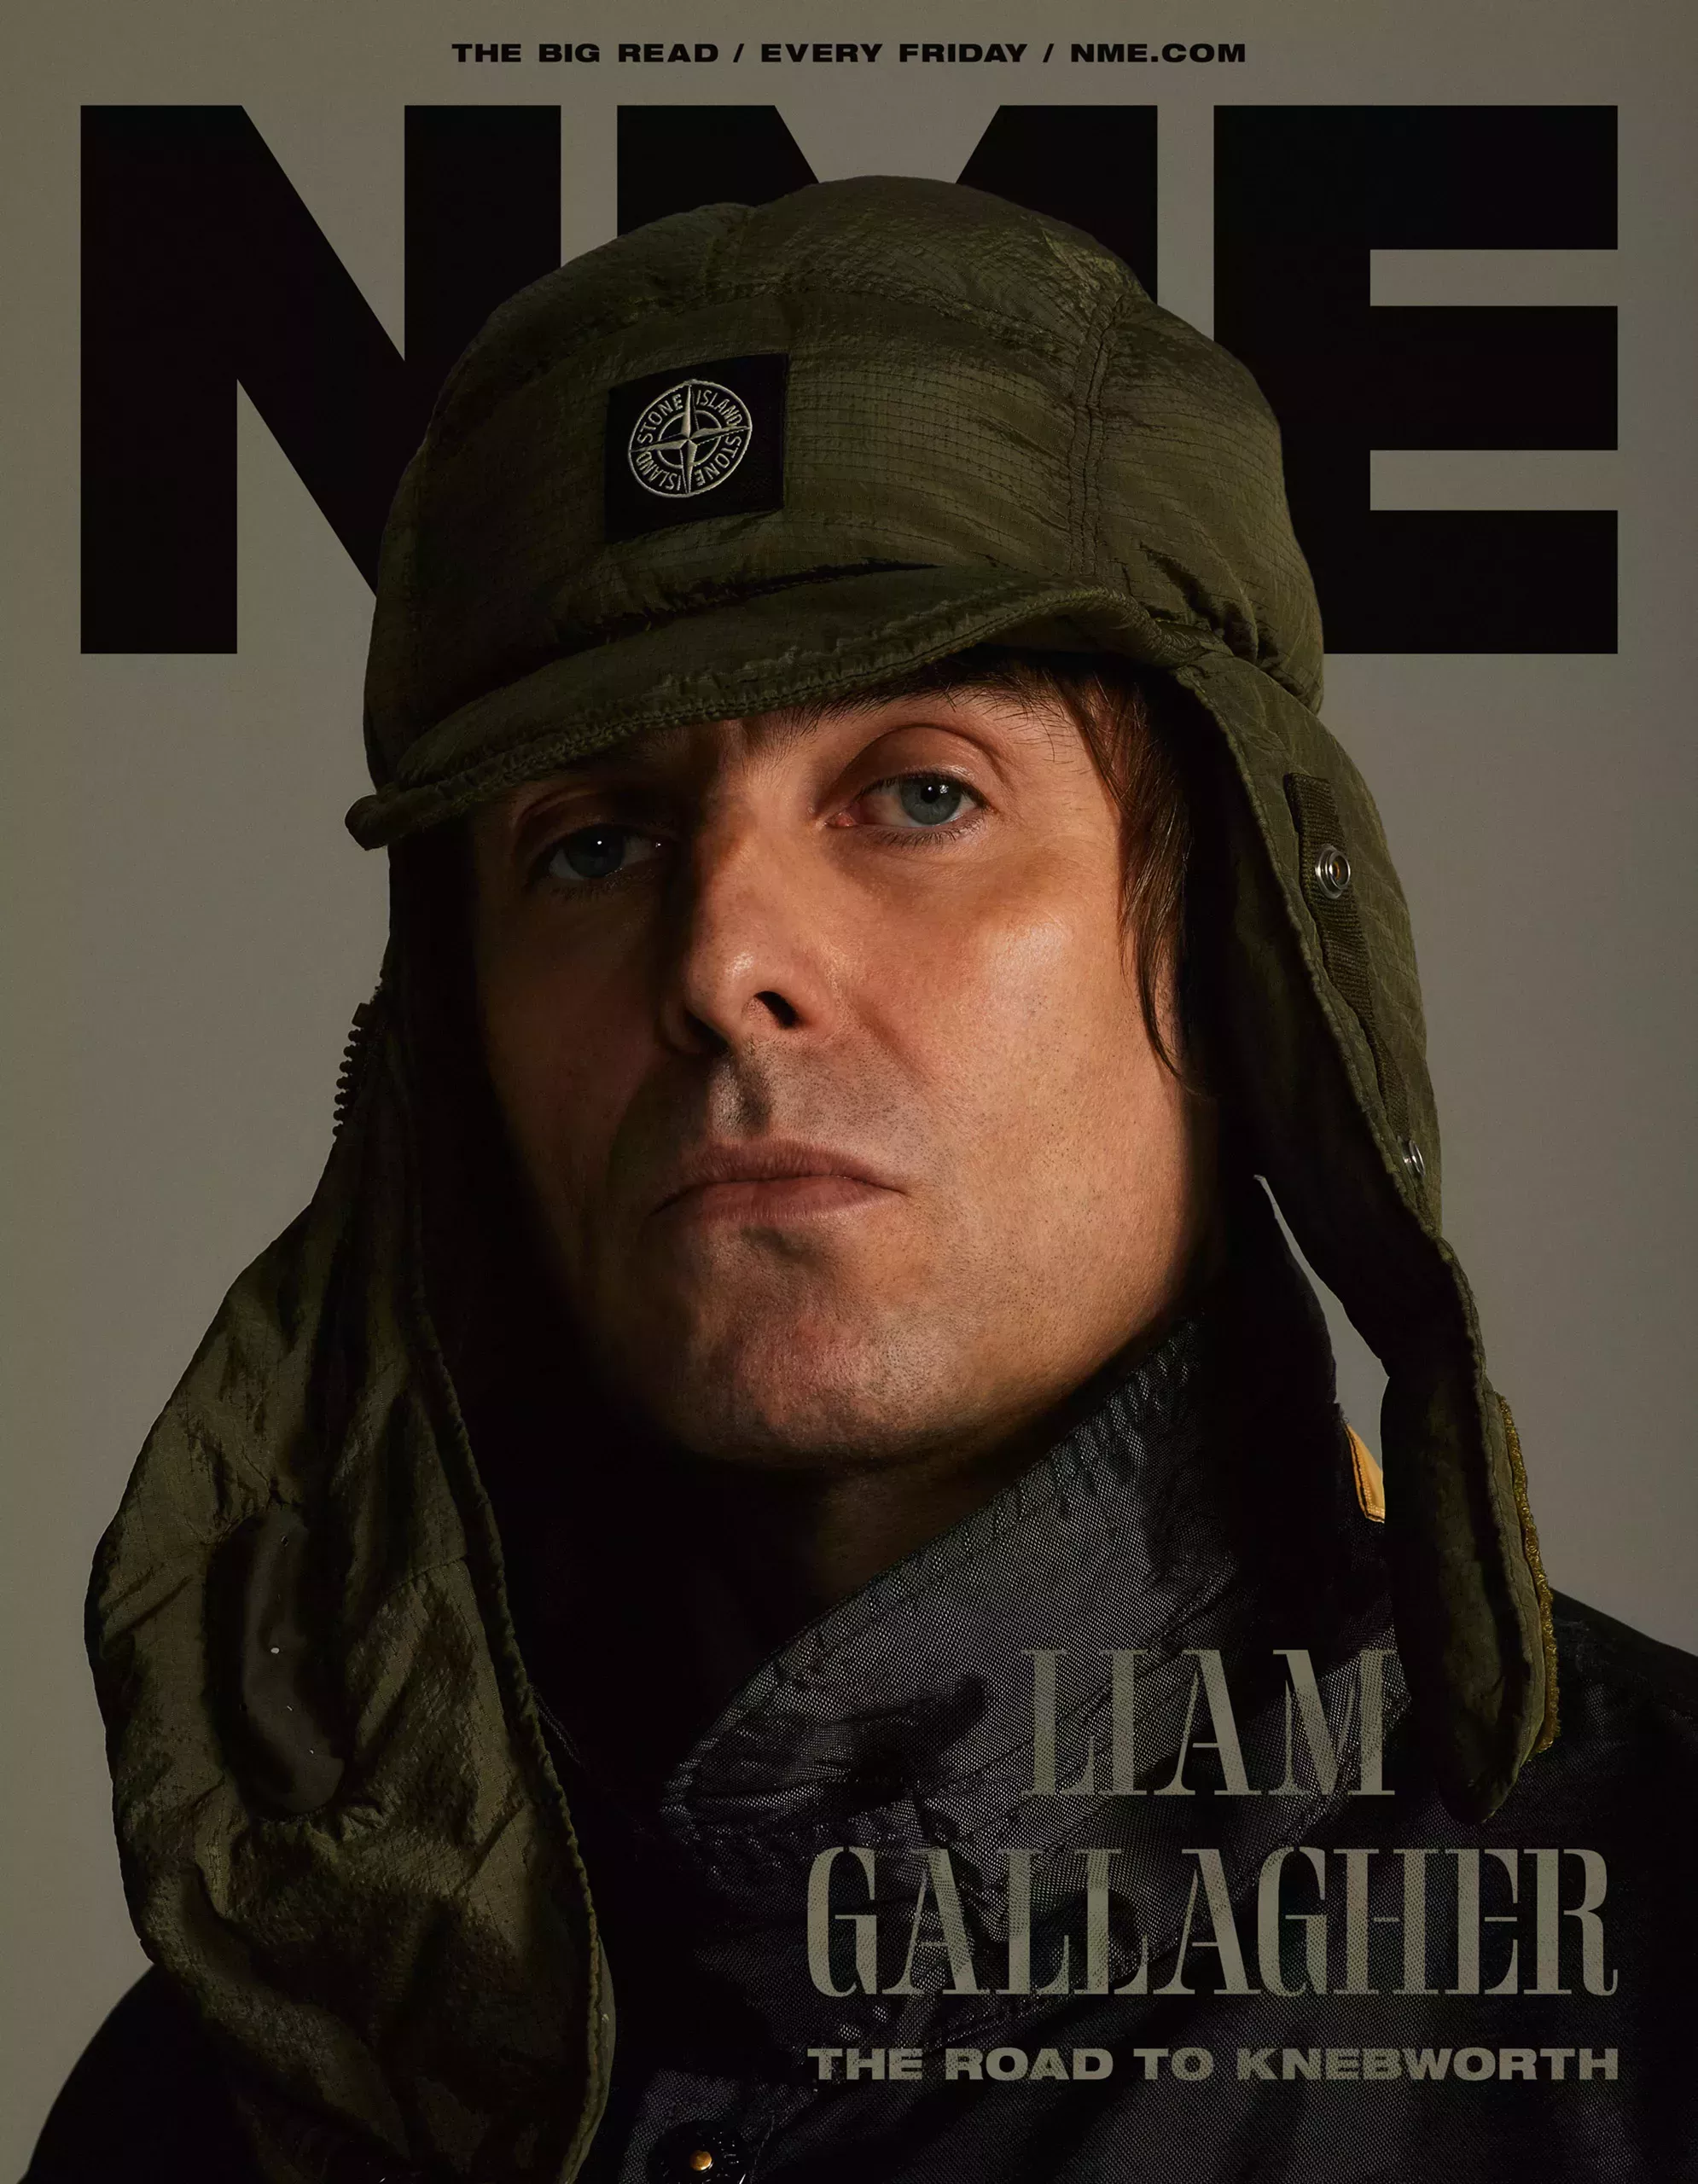 Liam Gallagher on the cover of NME